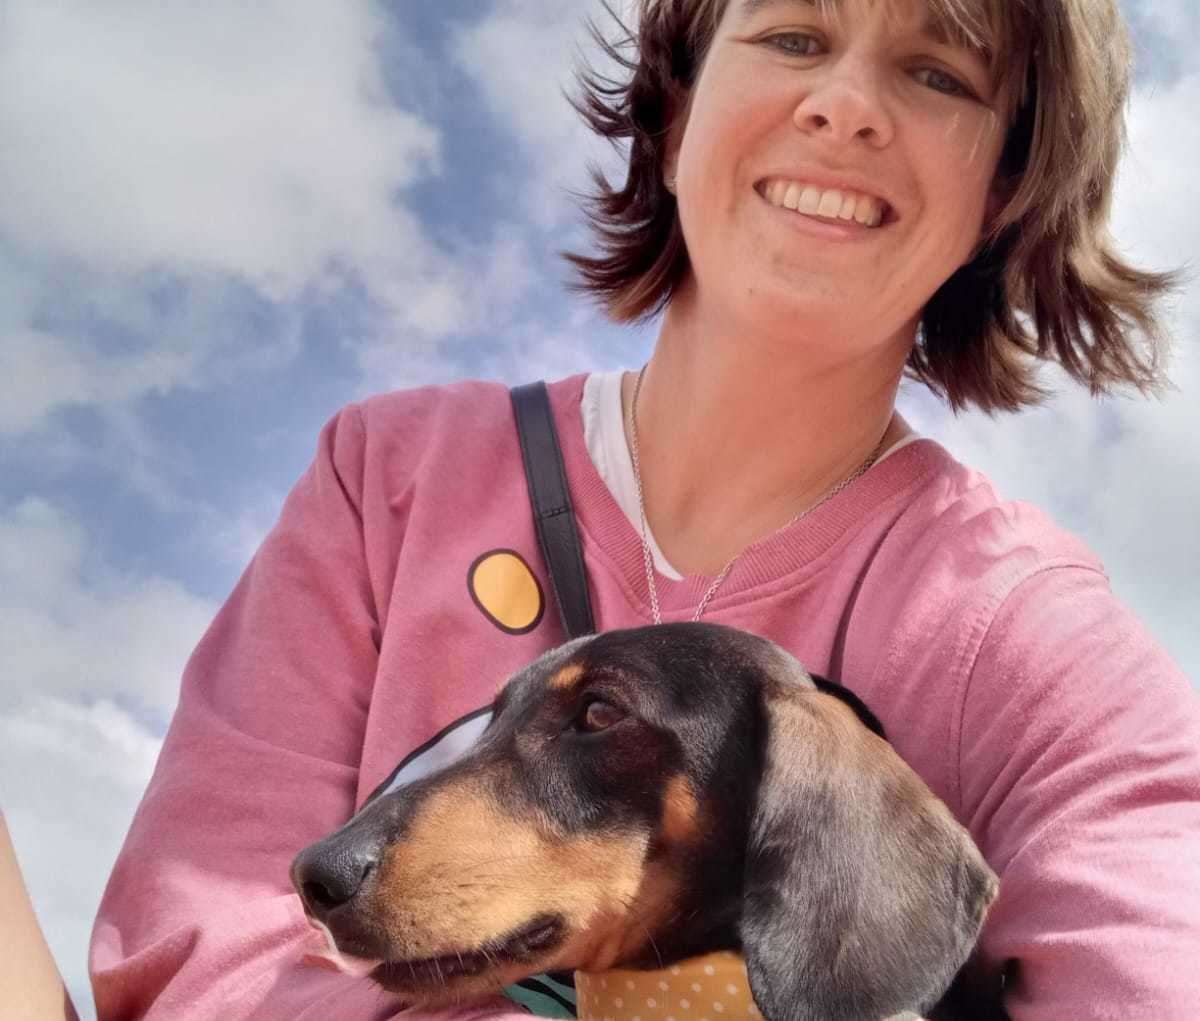 Archie the dachshund with his owner, Leila Behn